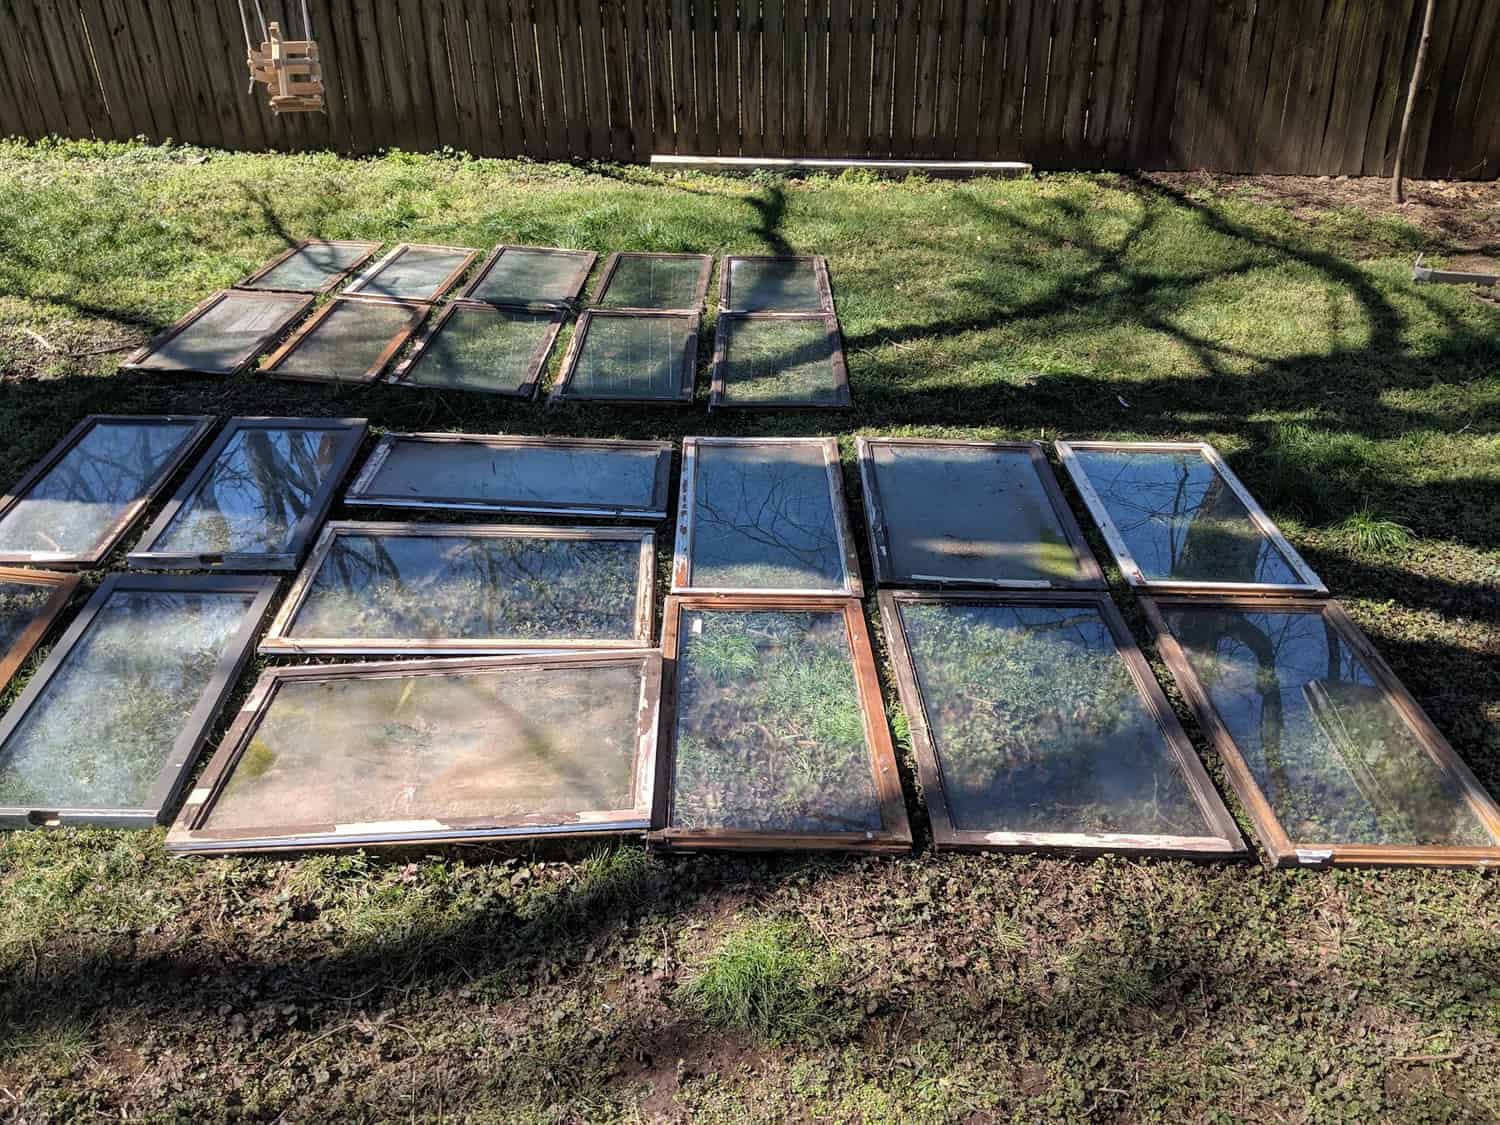 23 old windows in different sizes